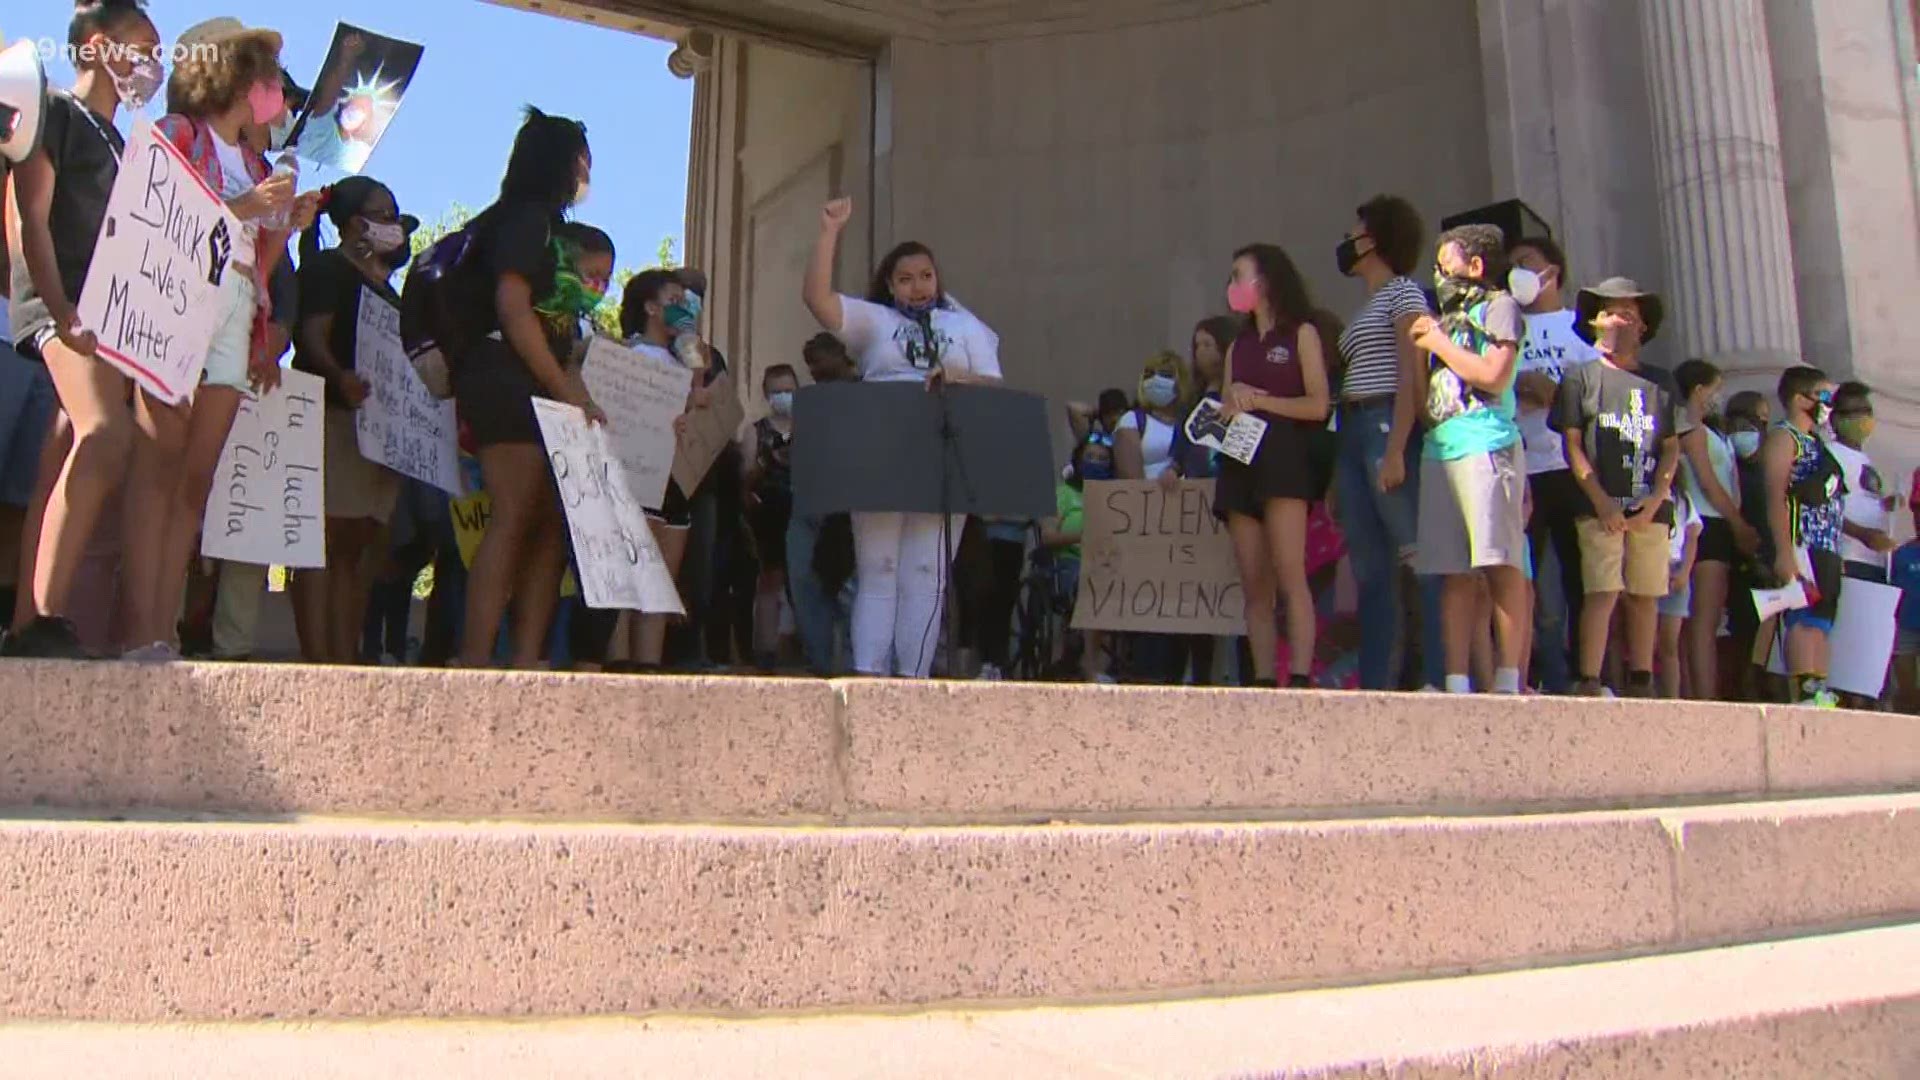 Protests sparked by the in-custody death of George Floyd in Minnesota continue in Colorado for the 11th straight day.